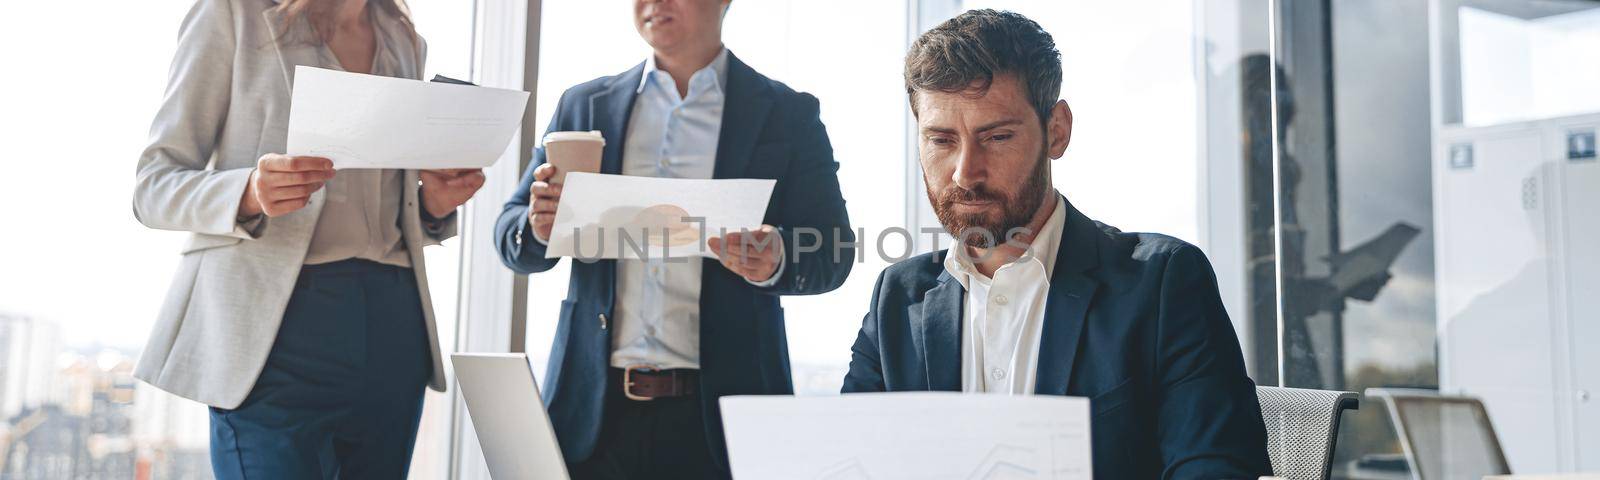 Smiling businessmen discussing documents with graphs and charts in a modern office during meeting by Yaroslav_astakhov